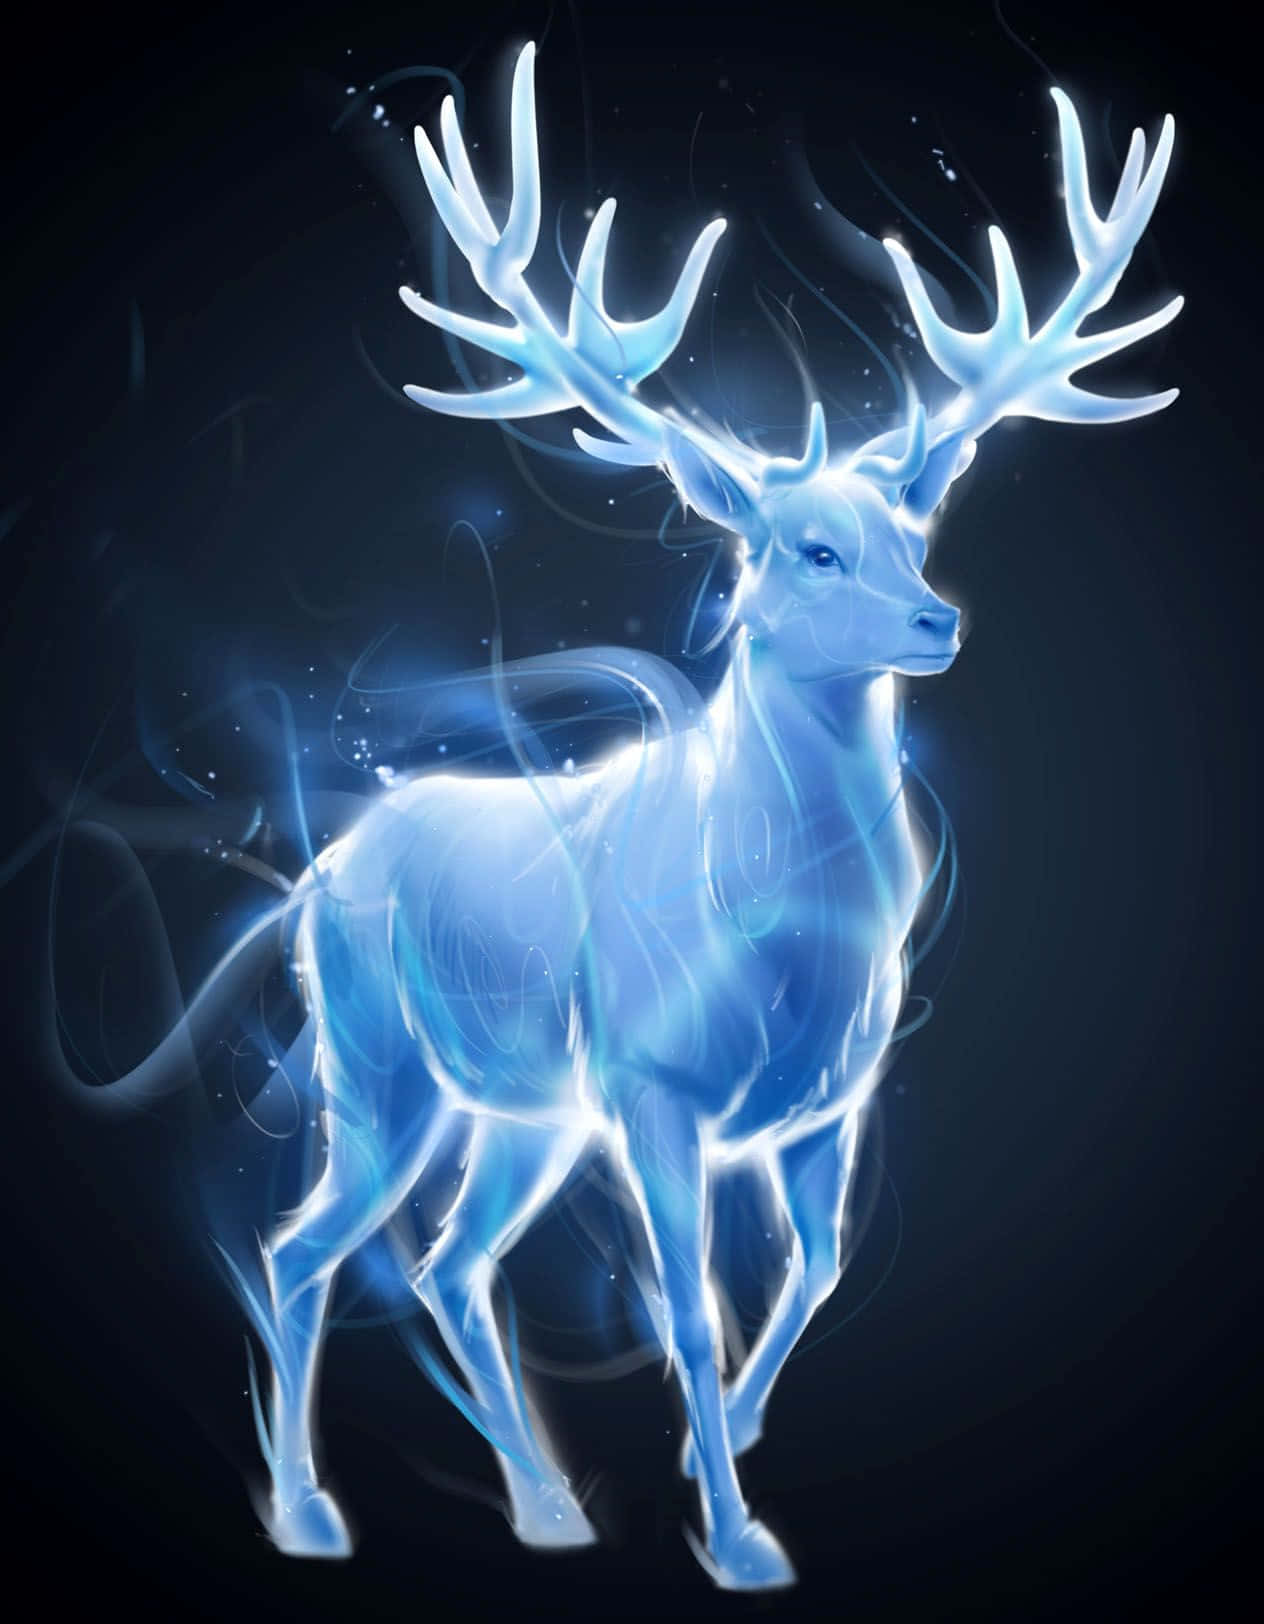 Mesmerizing Patronus Charm in a Magical Forest Wallpaper